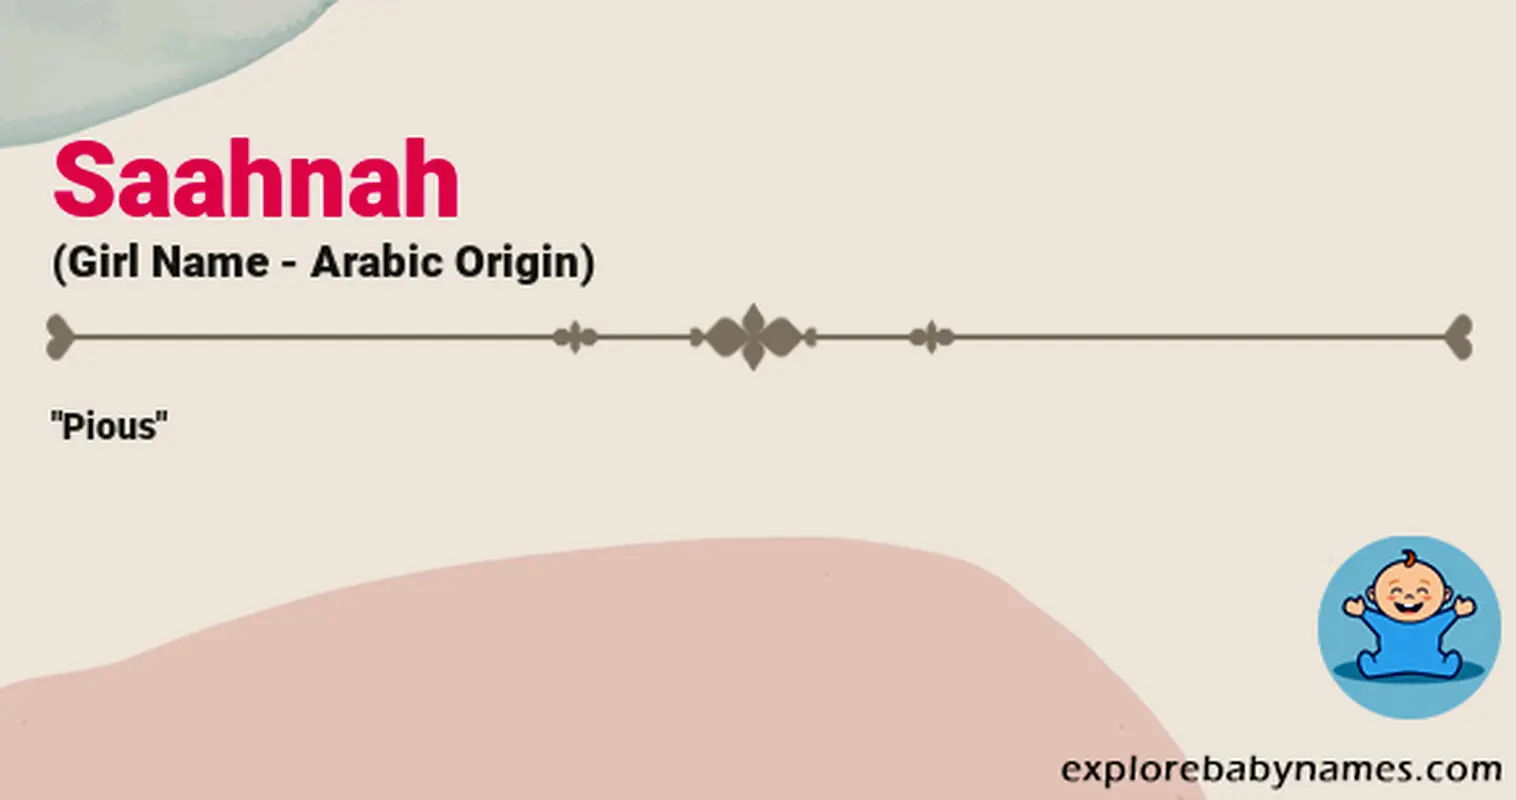 Meaning of Saahnah